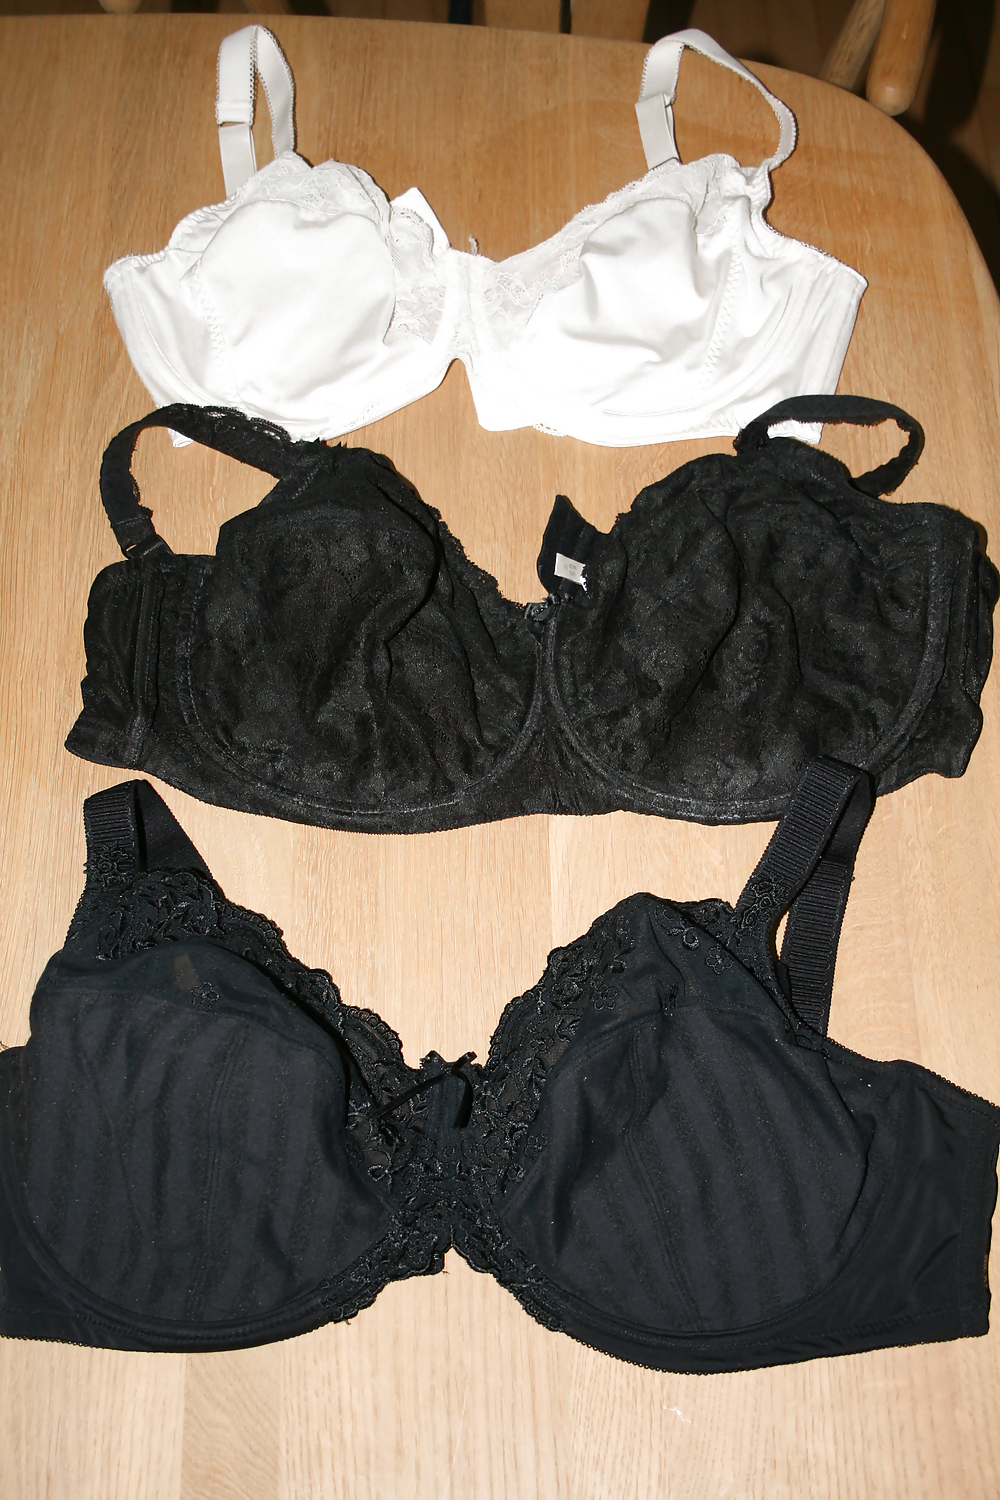 G cup bras and bigger #12082733